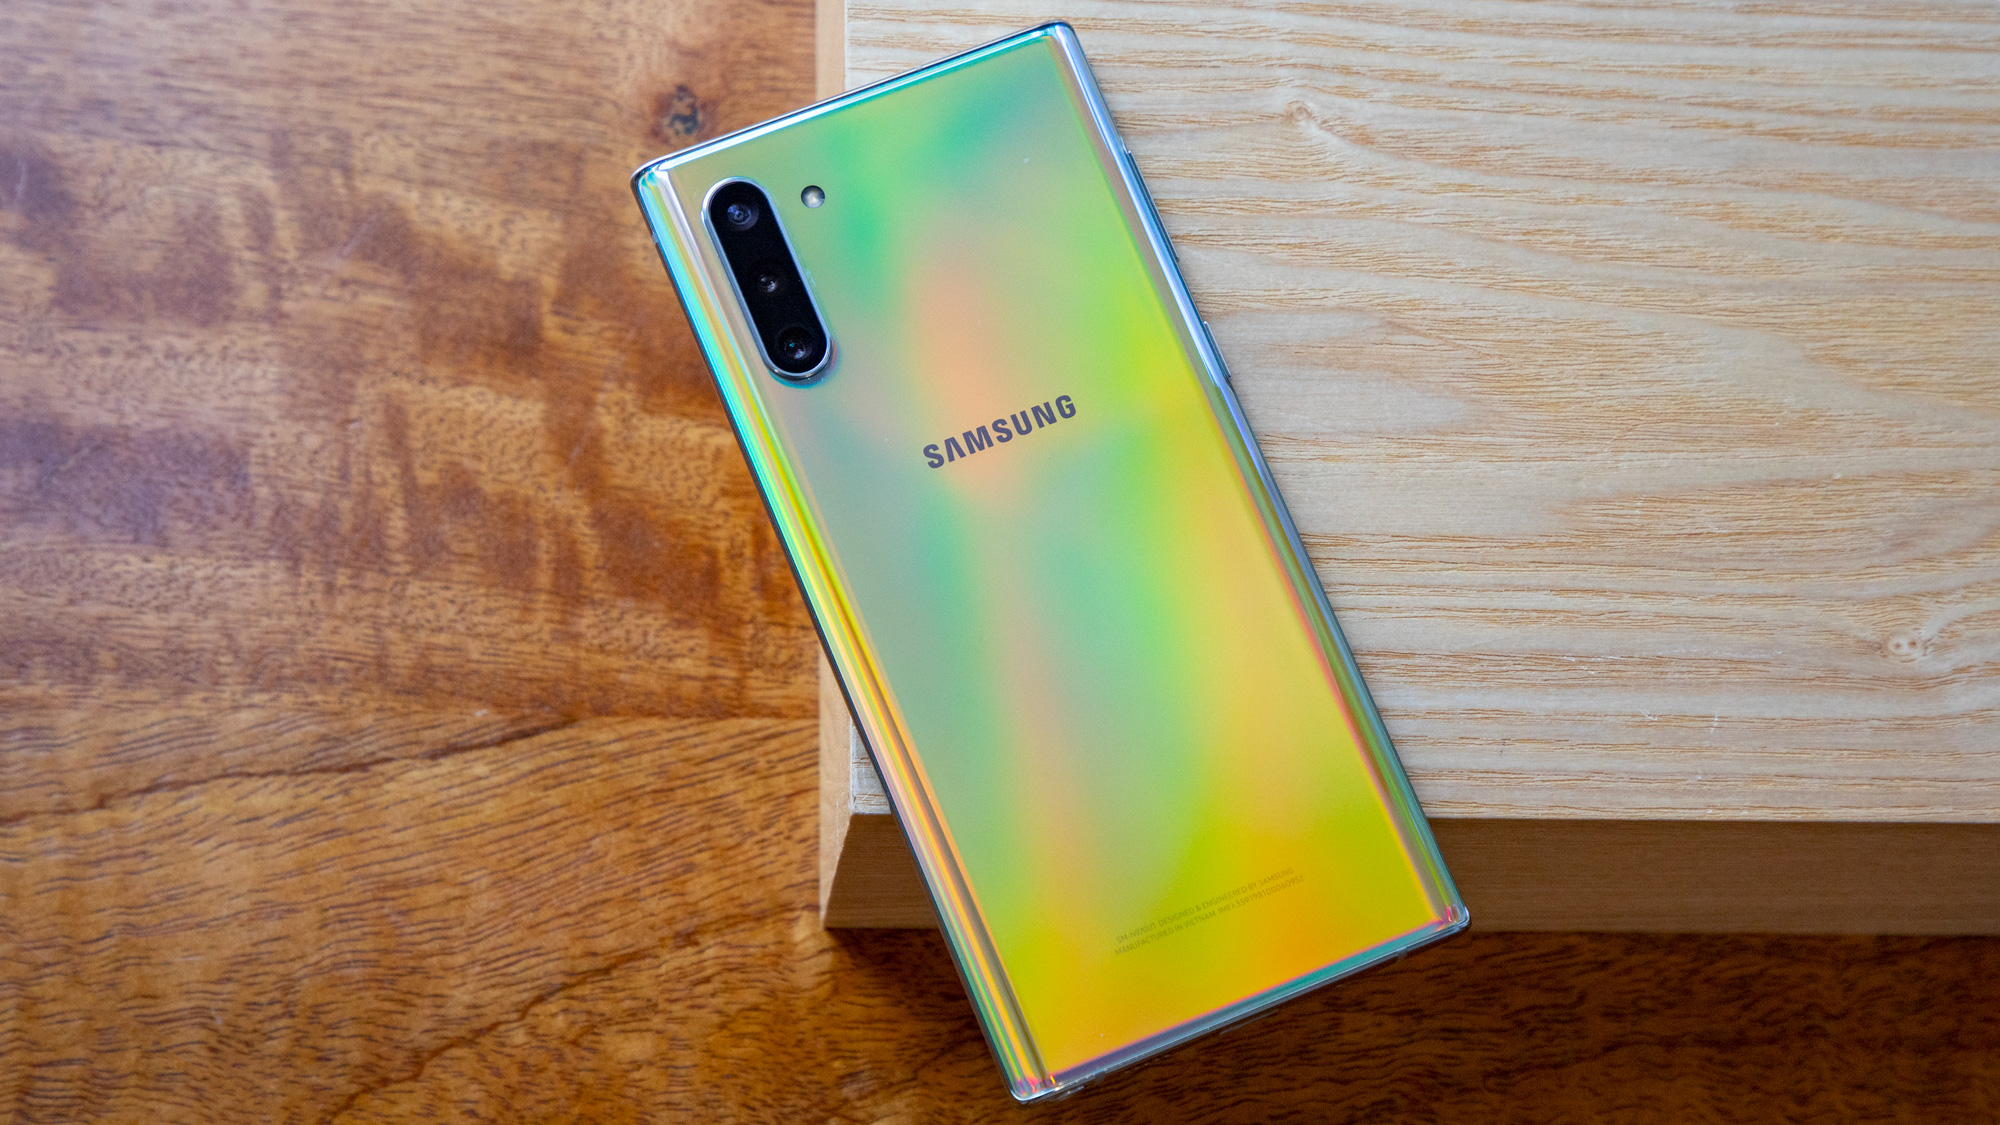 Galaxy s10 note. Samsung Galaxy Note 10. Самсунг галакси нот 10 Лайт. Самсунг галакси ноут 10s. Samsung Galaxy Note s10 Lite.